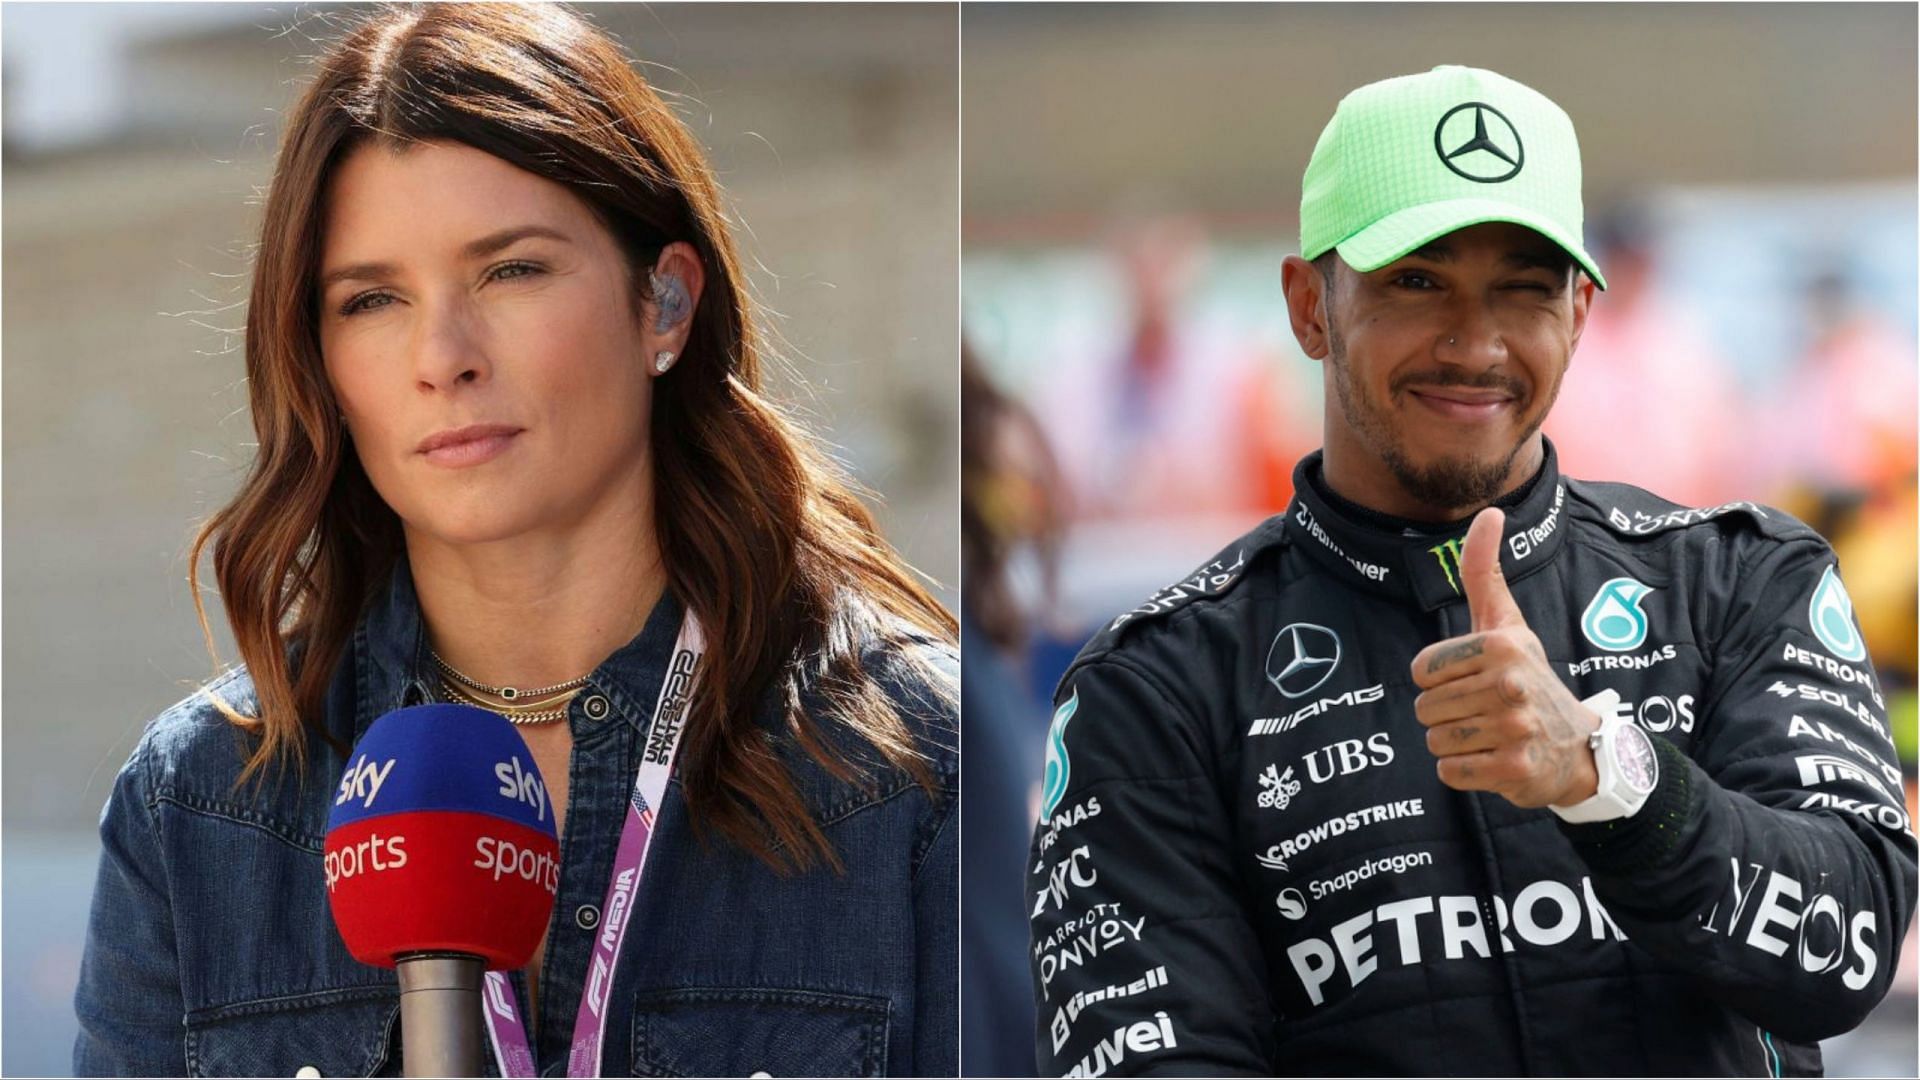 Danica Patrick had some choice words about Lewis Hamilton